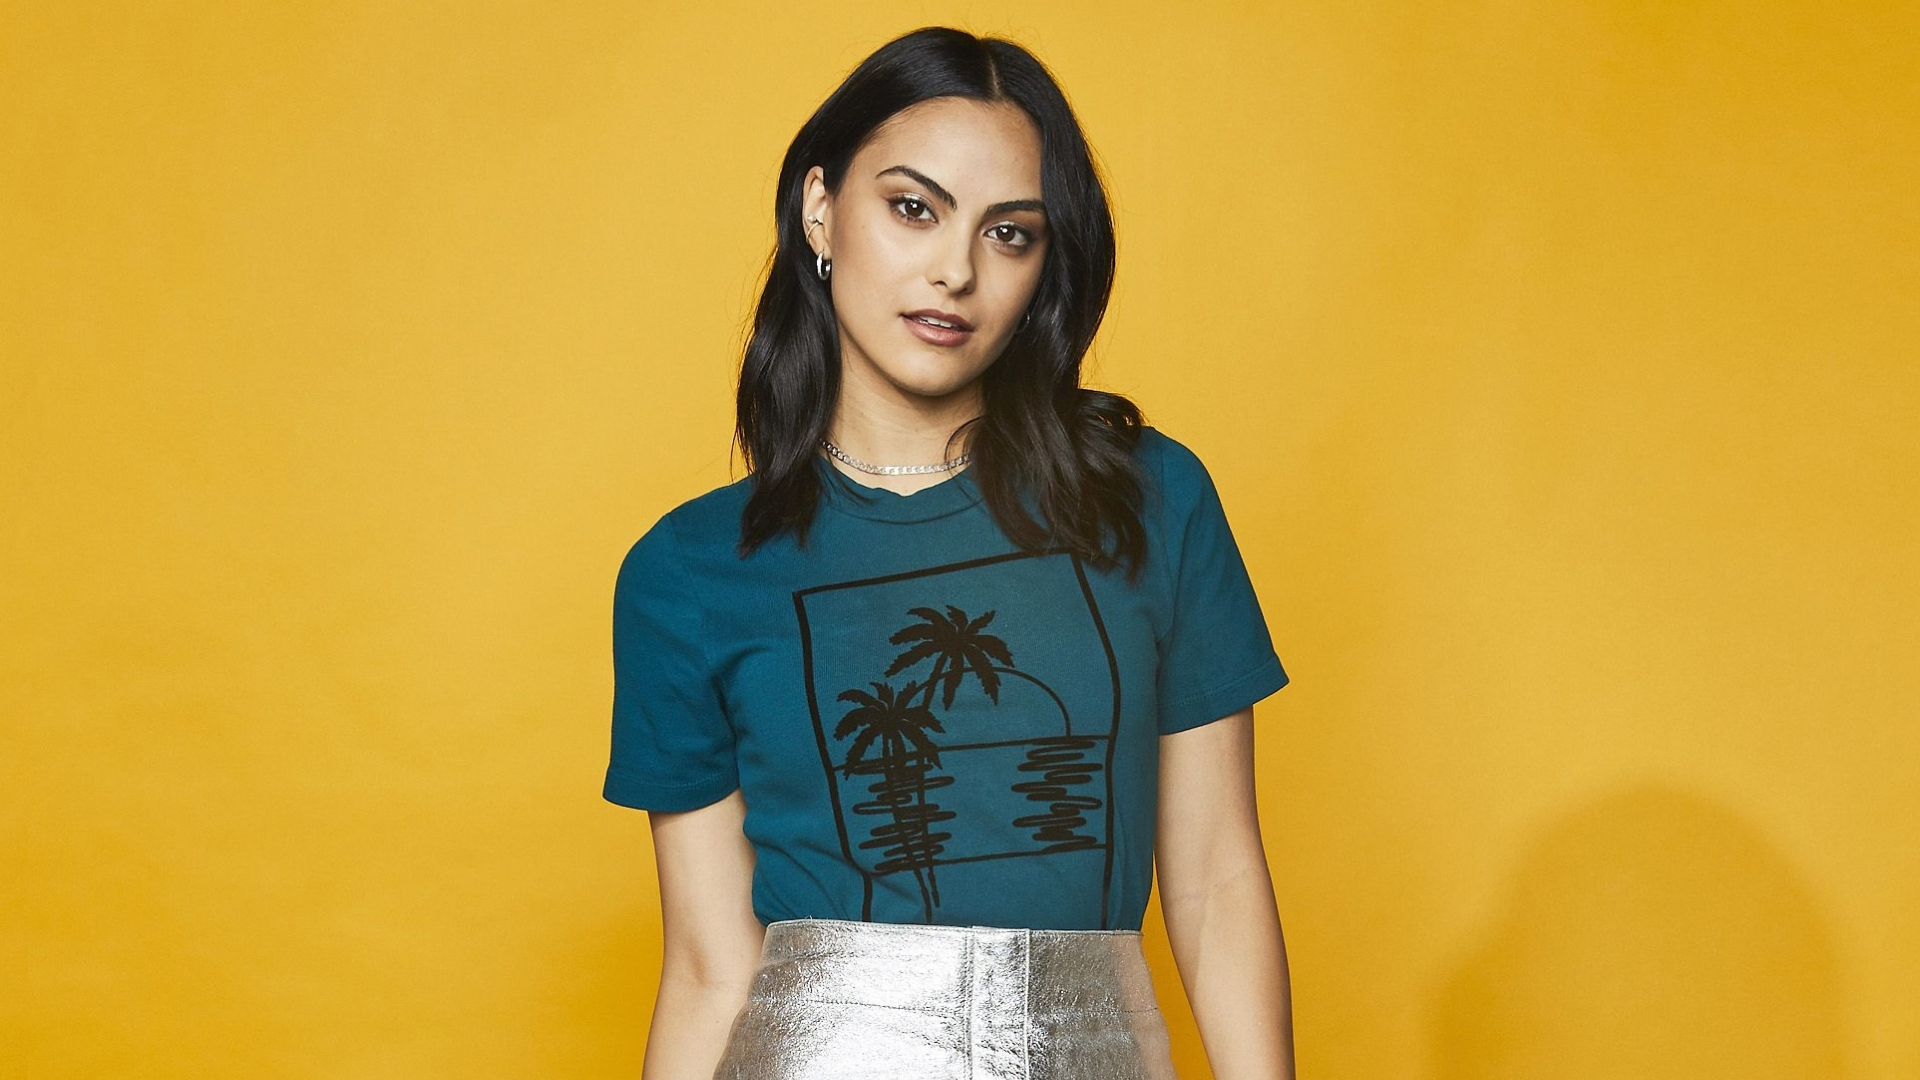 12 camila mendes wallpapers. 